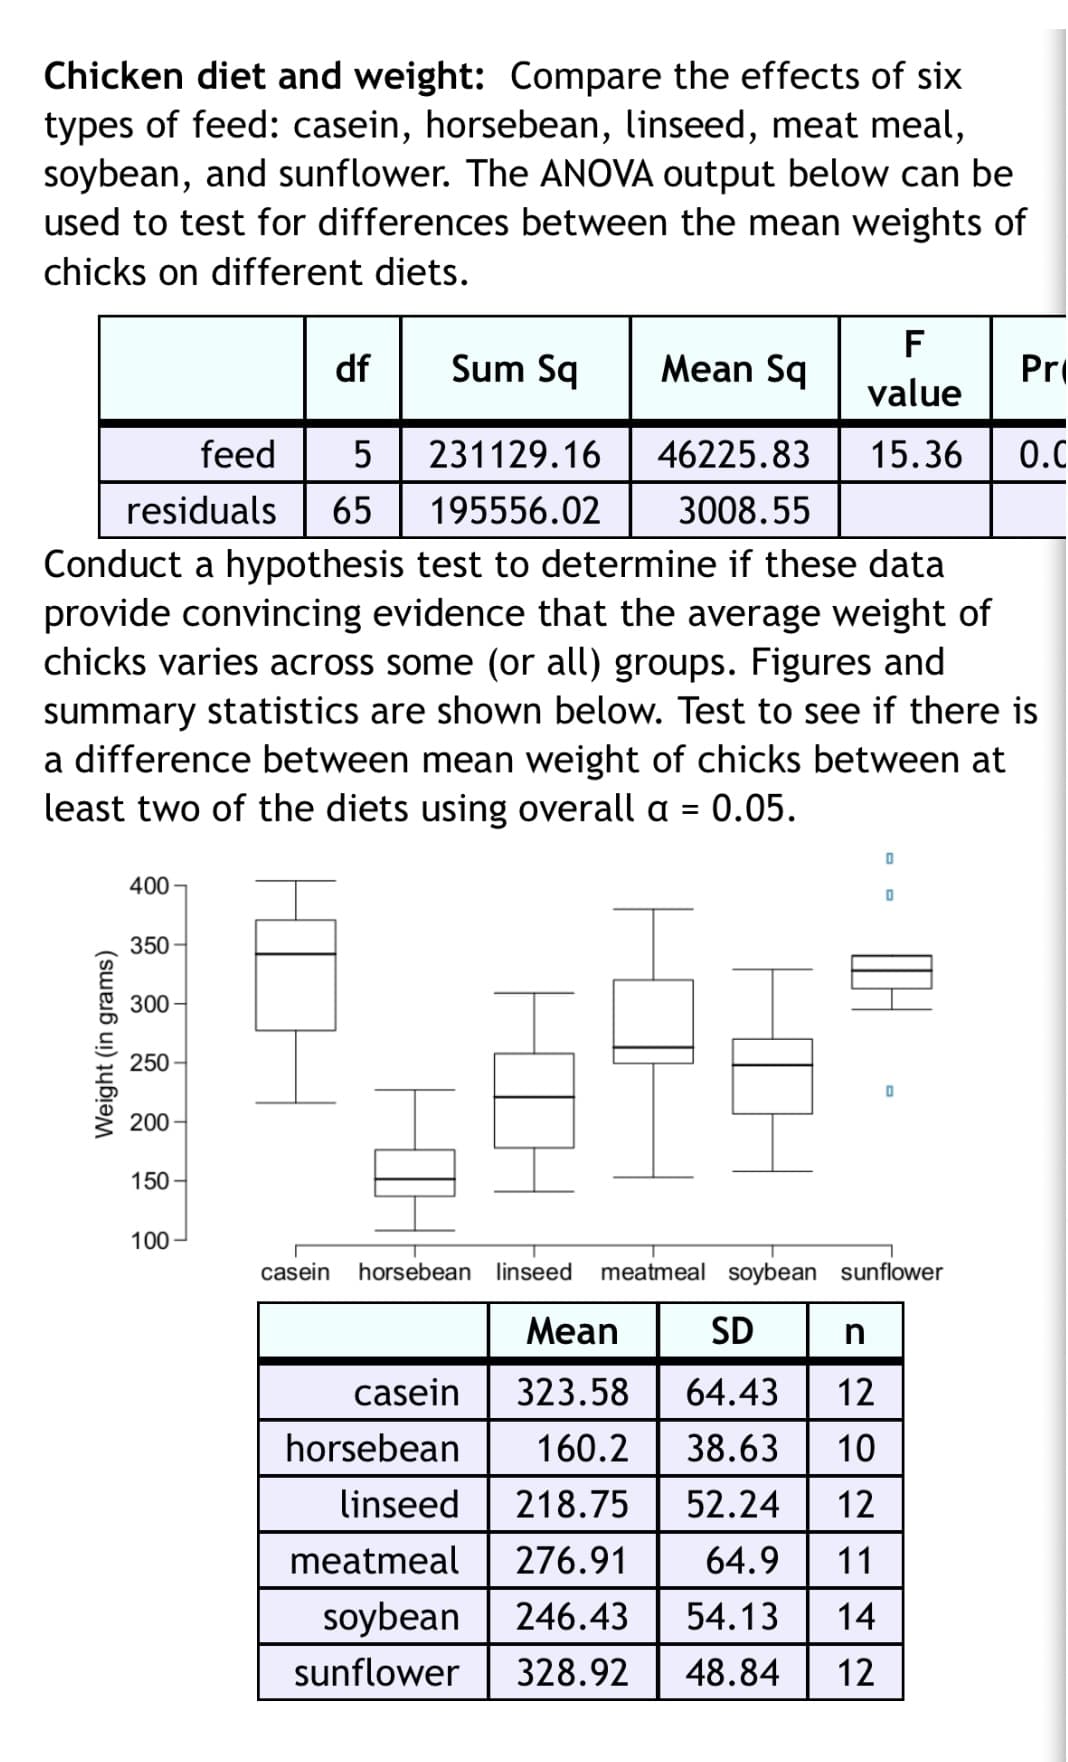 Chicken diet and weight: Compare the effects of six
types of feed: casein, horsebean, linseed, meat meal,
soybean, and sunflower. The ANOVA output below can be
used to test for differences between the mean weights of
chicks on different diets.
F
df
Sum Sq
Mean Sq
Pri
value
feed
5
231129.16
46225.83 15.36
0.C
residuals
65
195556.02
3008.55
Conduct a hypothesis test to determine if these data
provide convincing evidence that the average weight of
chicks varies across some (or all) groups. Figures and
summary statistics are shown below. Test to see if there is
a difference between mean weight of chicks between at
least two of the diets using overall a = 0.05.
400
350
300
250
200
150-
100 -
casein
horsebean linseed
meatmeal soybean sunflower
Mean
SD
casein
323.58
64.43
12
horsebean
160.2
38.63
10
linseed
218.75
52.24
12
meatmeal
276.91
64.9
11
soybean
246.43
54.13
14
sunflower
328.92
48.84
12
Weight (in grams)
